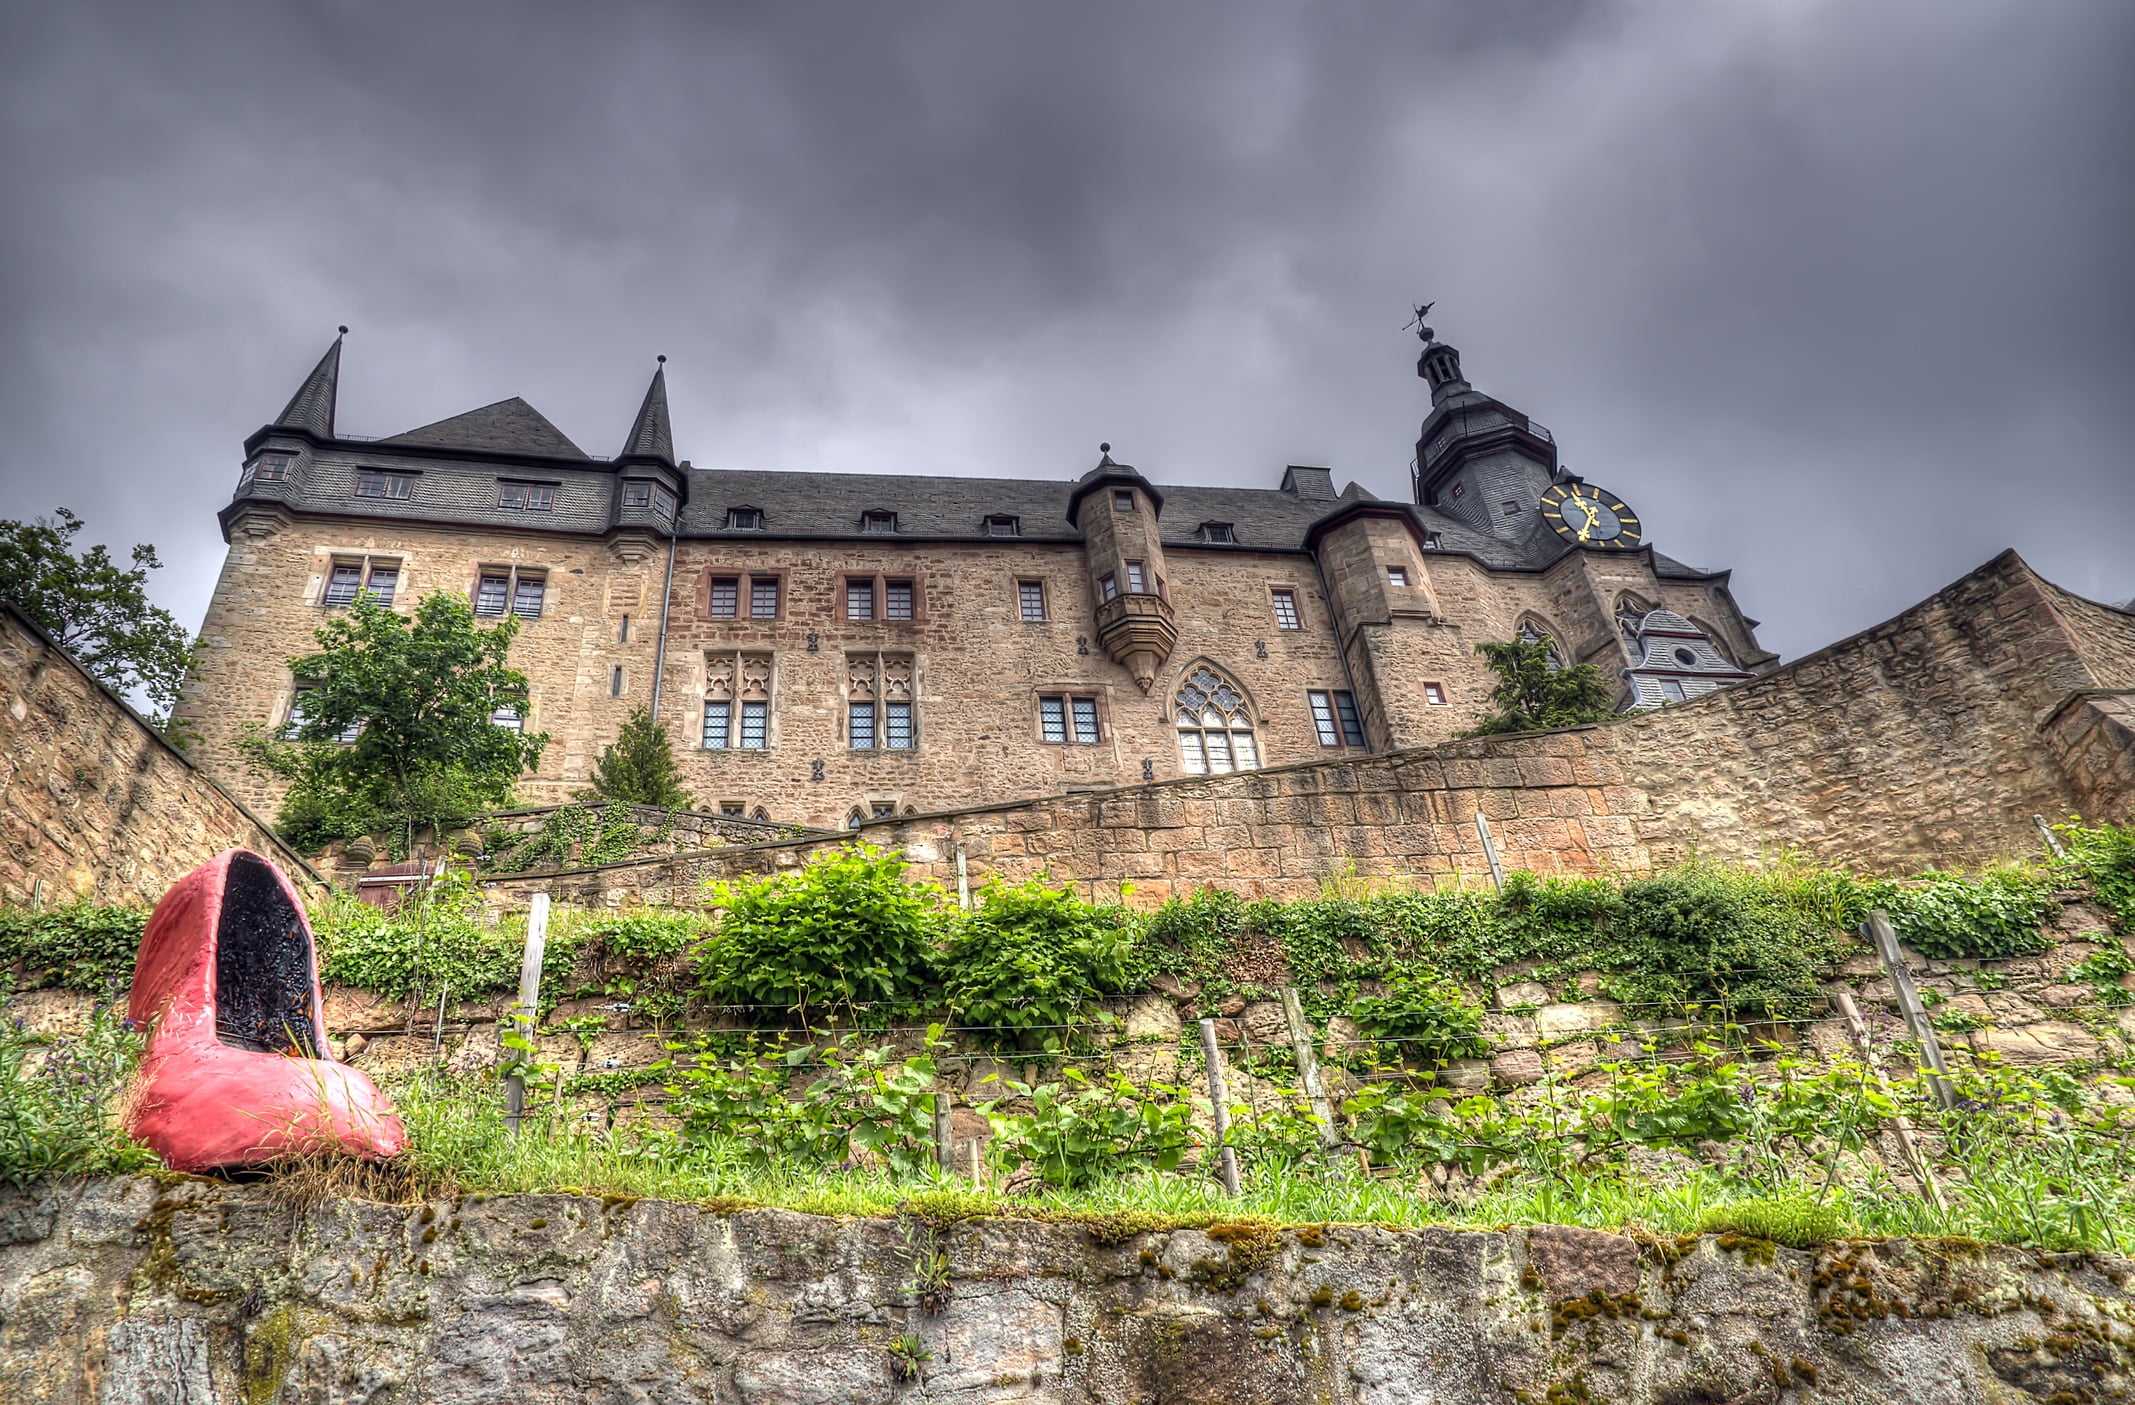 Marburger Schloss (Marburg castle) is a castle in Marburg, Hesse, Germany, built in the 11th century as a fort. The building is today used partly as a museum and as an event site.